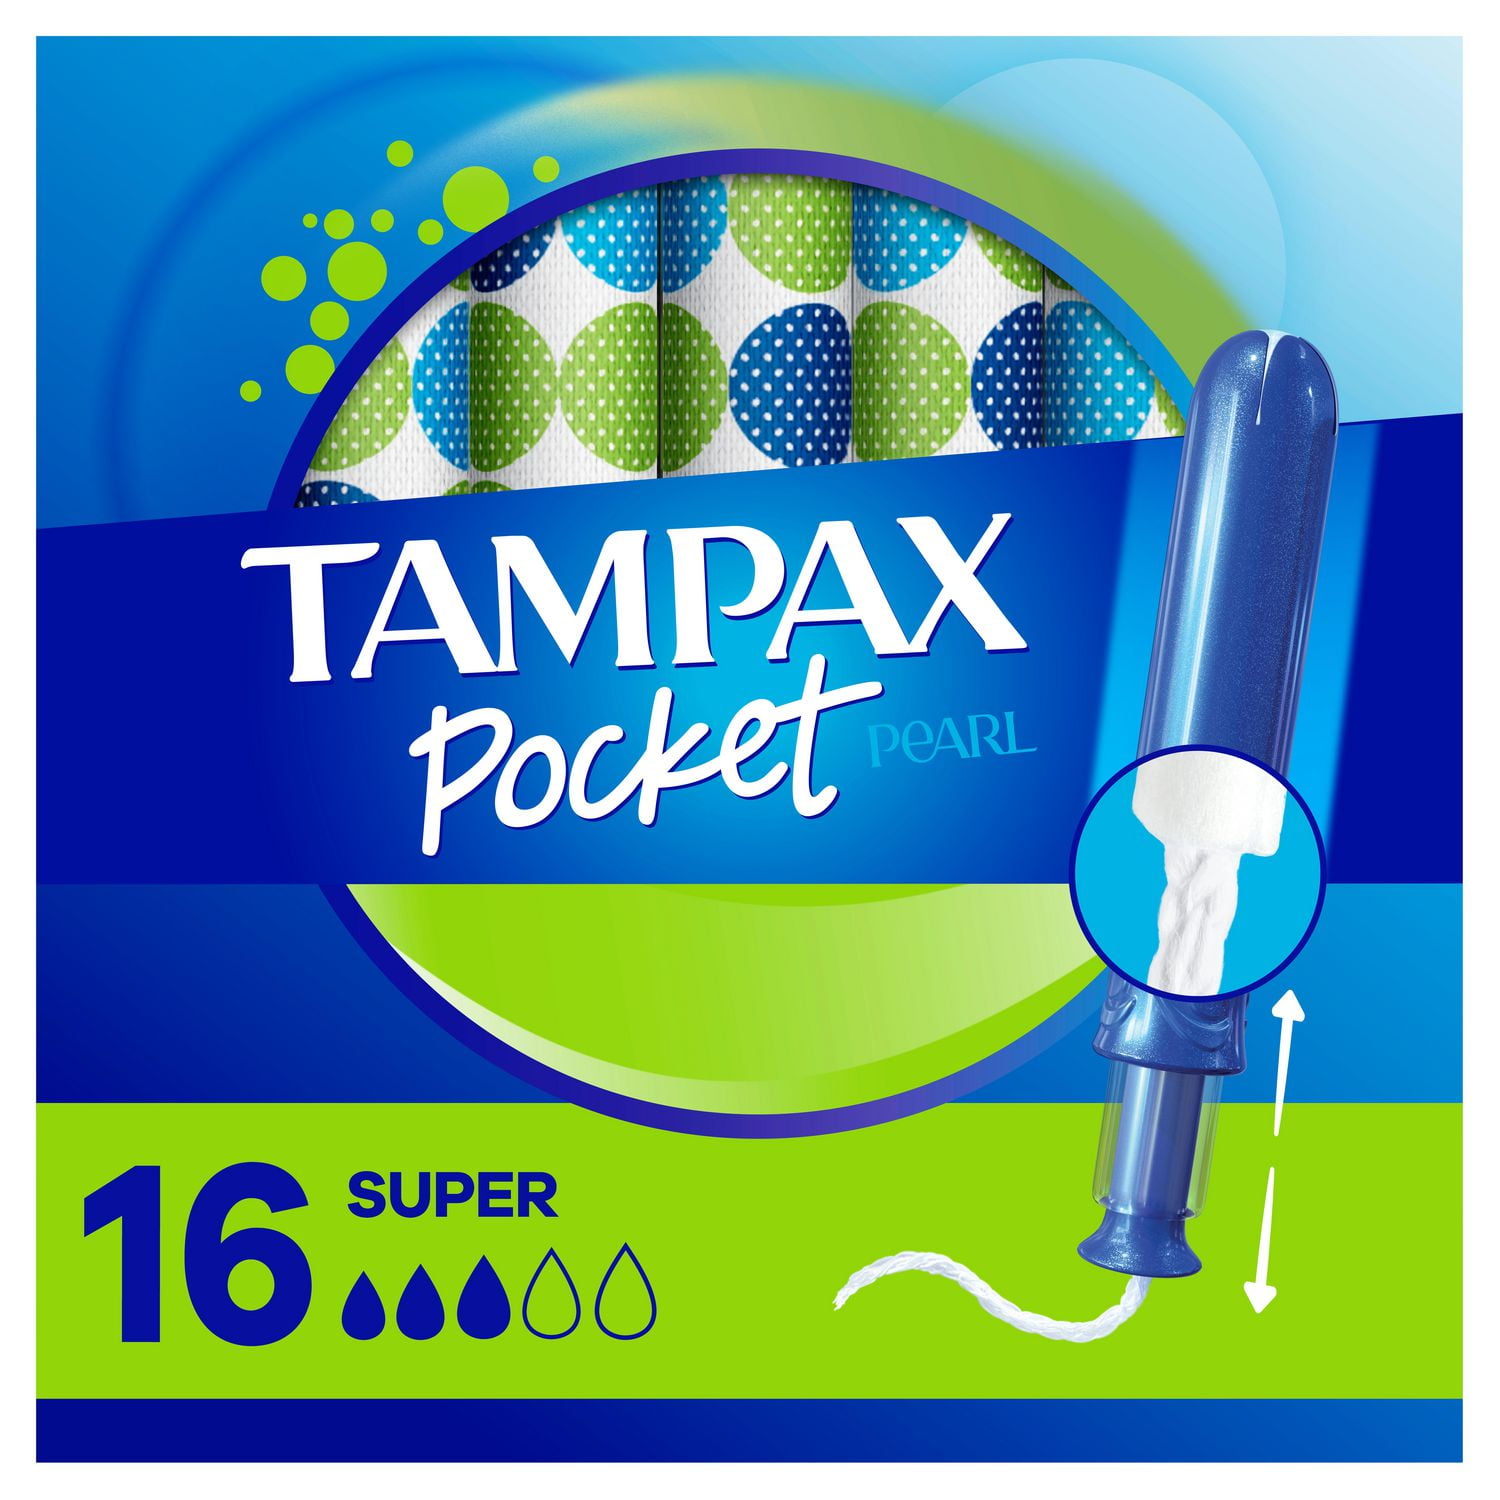 Tampax Pearl Tampons Super Plus Absorbency with BPA-Free Plastic Applicator  and LeakGuard Braid, Unscented, 18 Tampons, Unscented